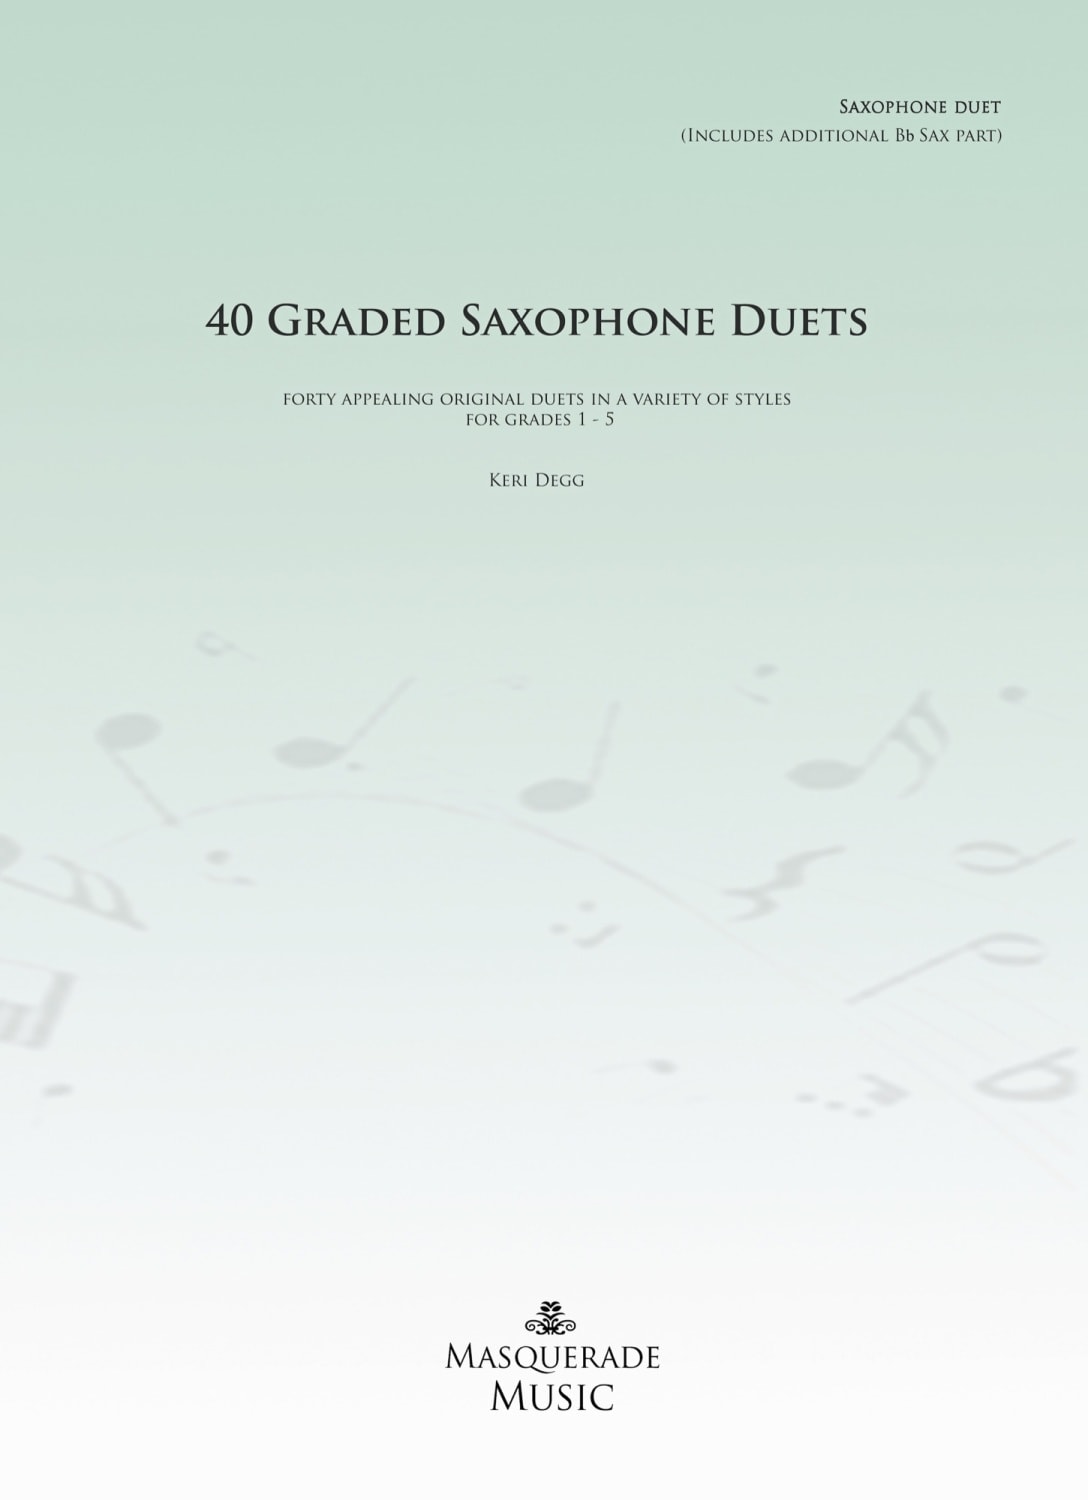 Degg: 40 Graded Saxophone Duets (Grades 1 - 5) published by Masquerade